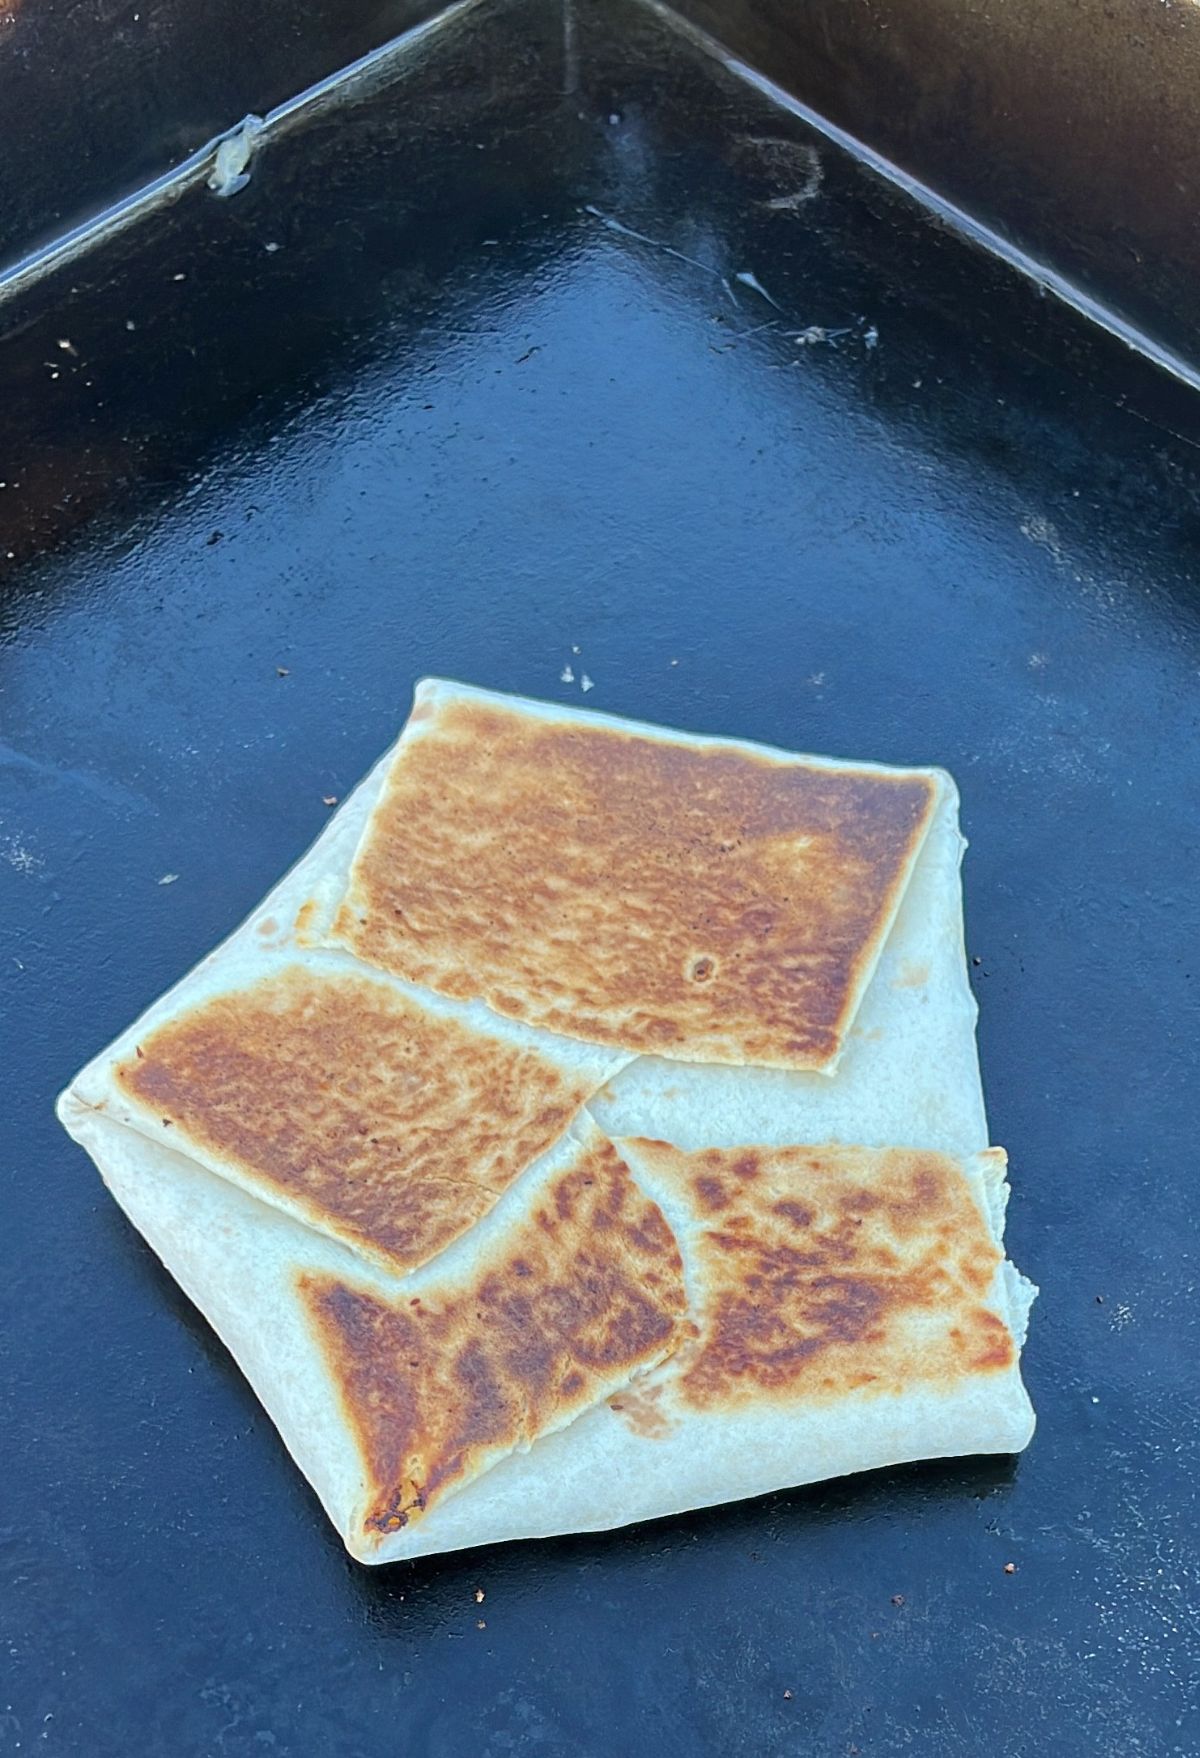 A folded and partially broken quesadilla with golden-brown toasted spots on a griddle.